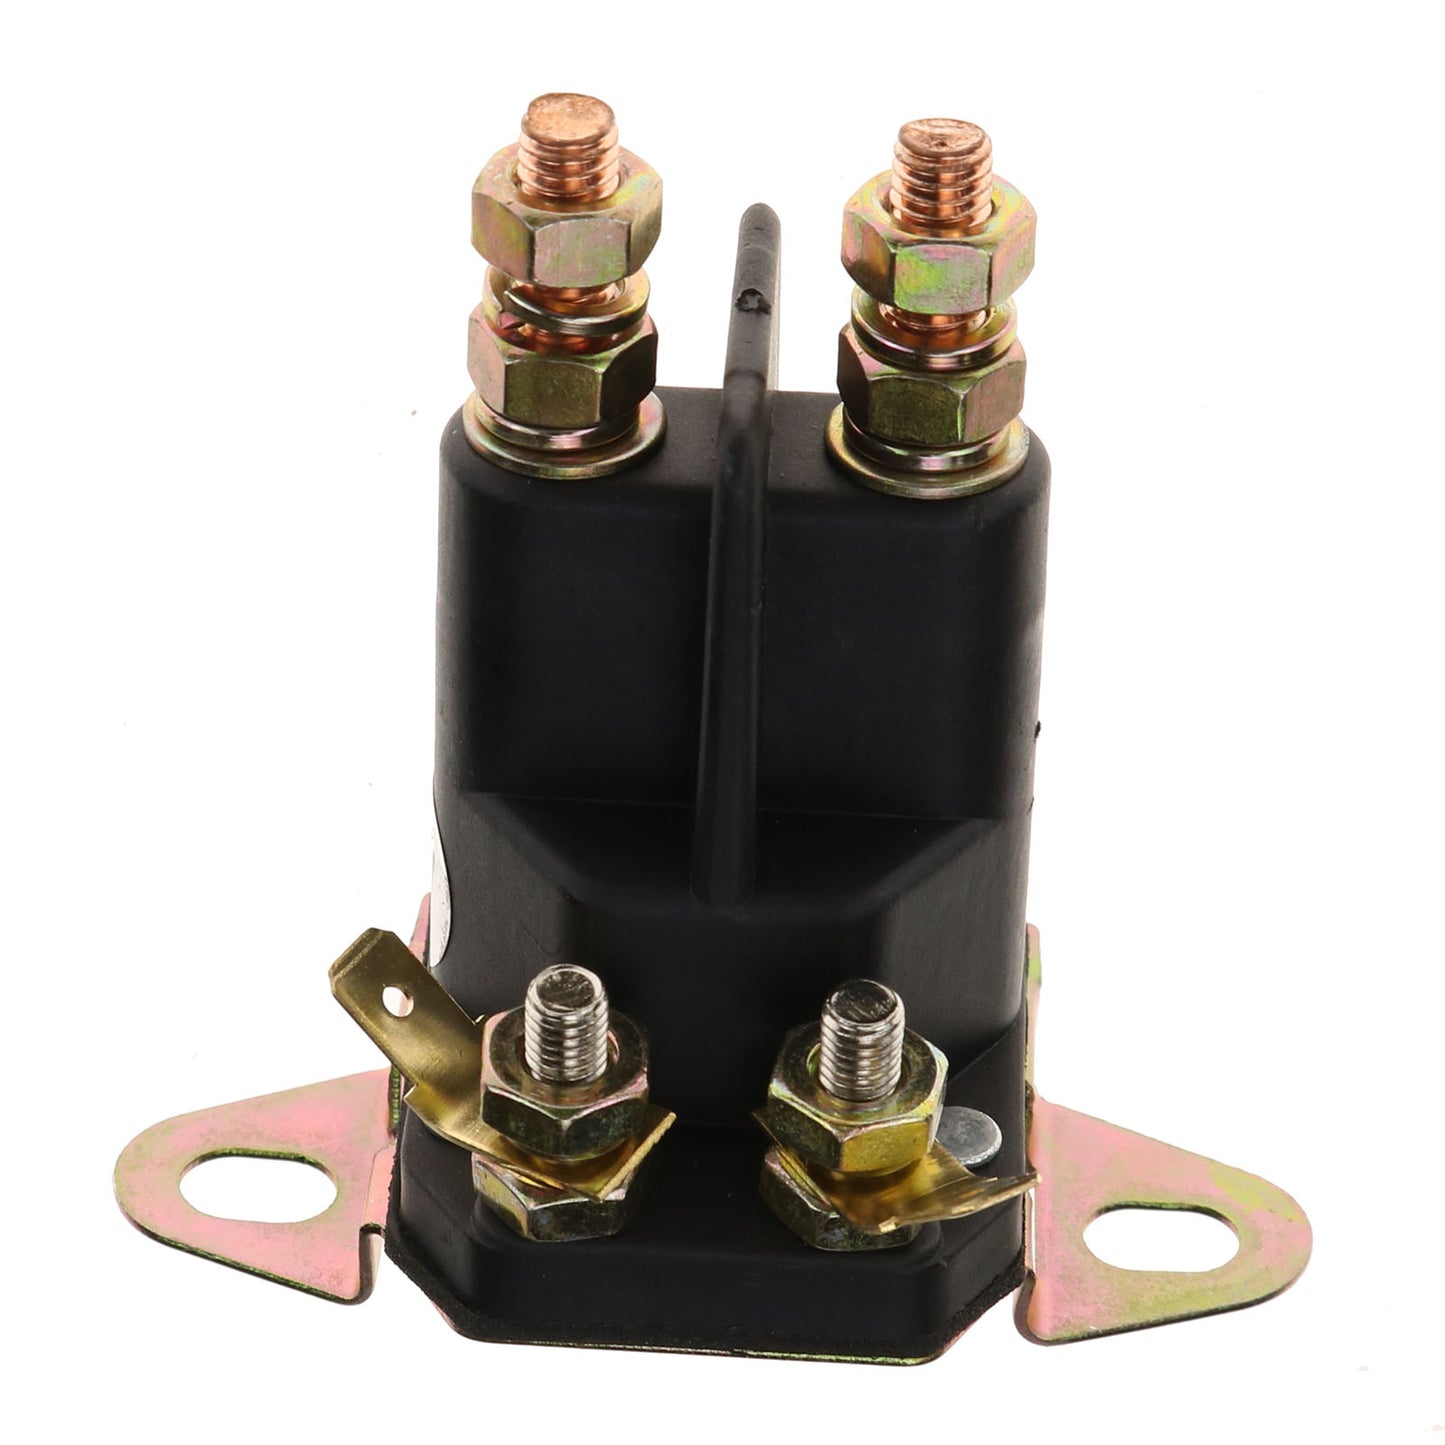 New Solenoid Relay Compatible with Troy Bilt LTX-16 Tractor Bolens/Gilson 1752137 1752137P 1753539 10772 212655 Lawn Mowers